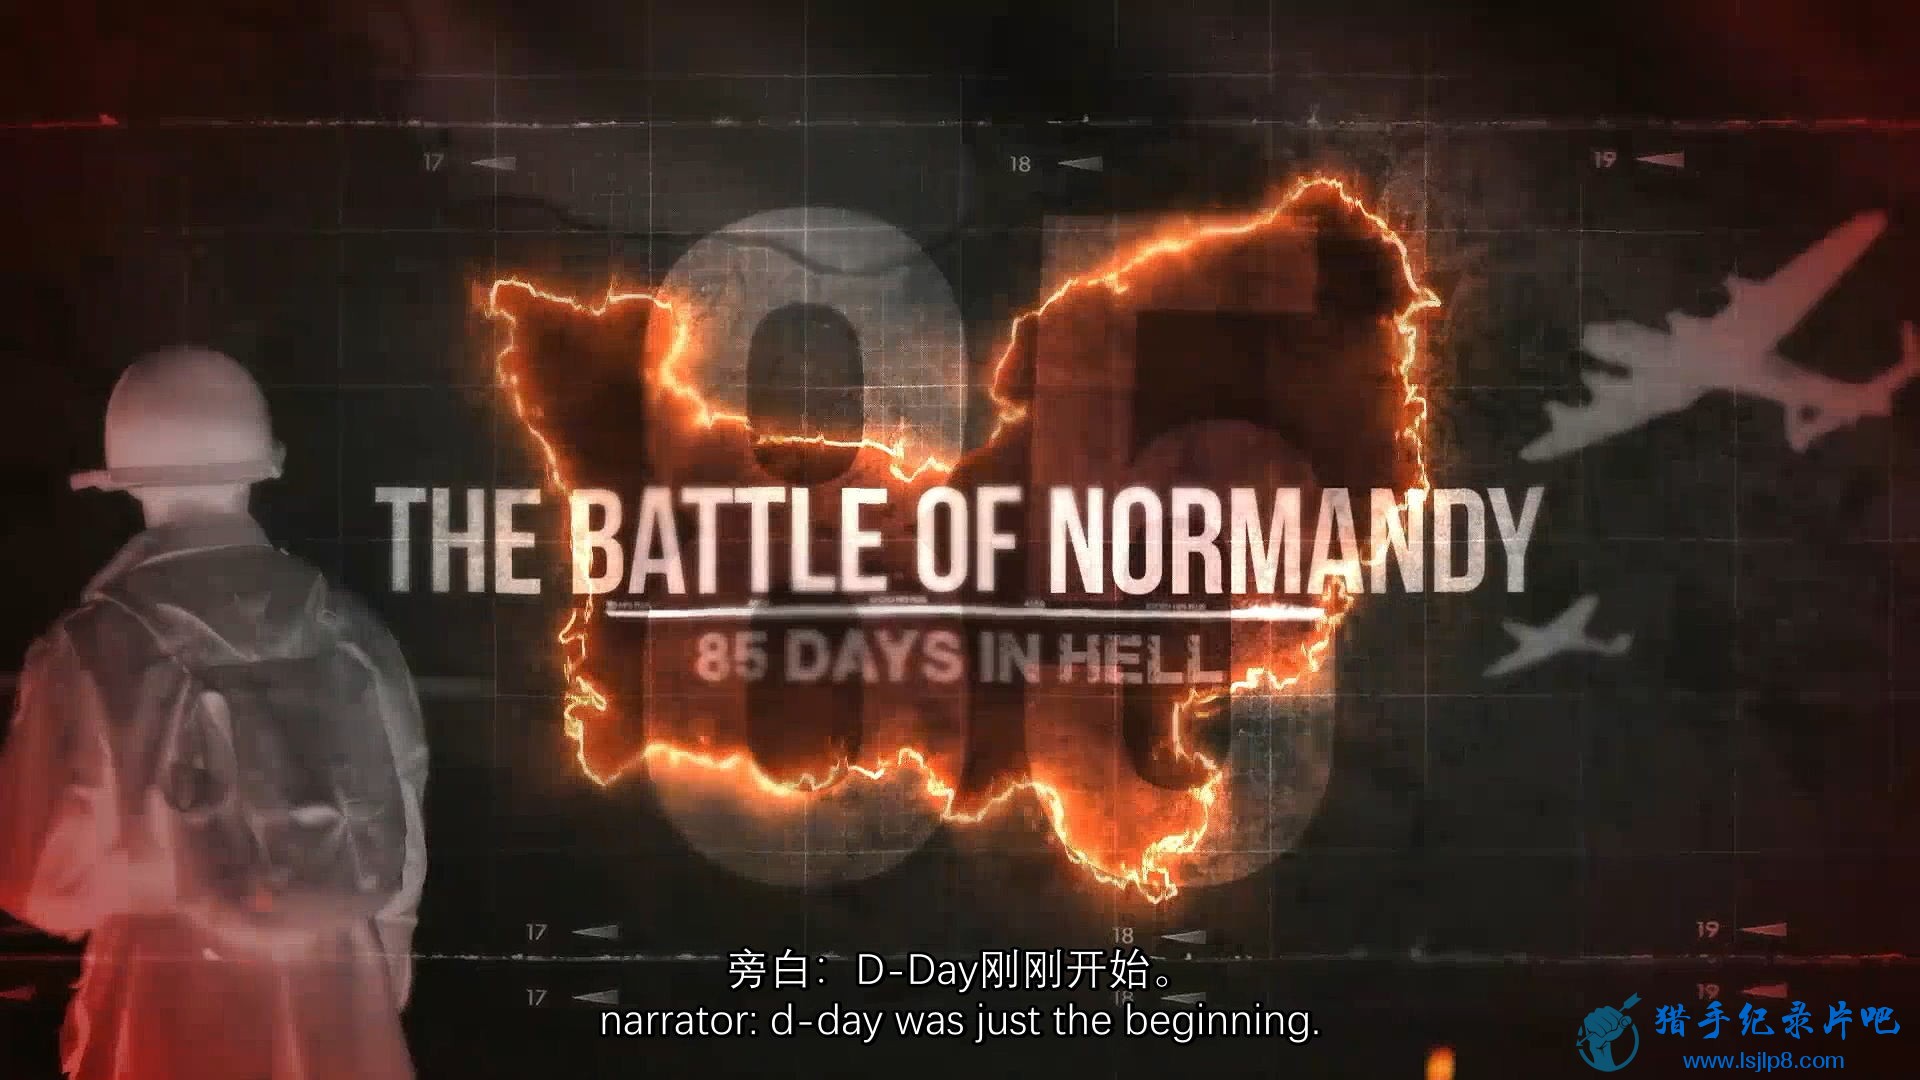 The.Battle.of.Normandy.85.Days.in.Hell.1080p.HDTV.x264.AAC.MVGroup.org.jpg